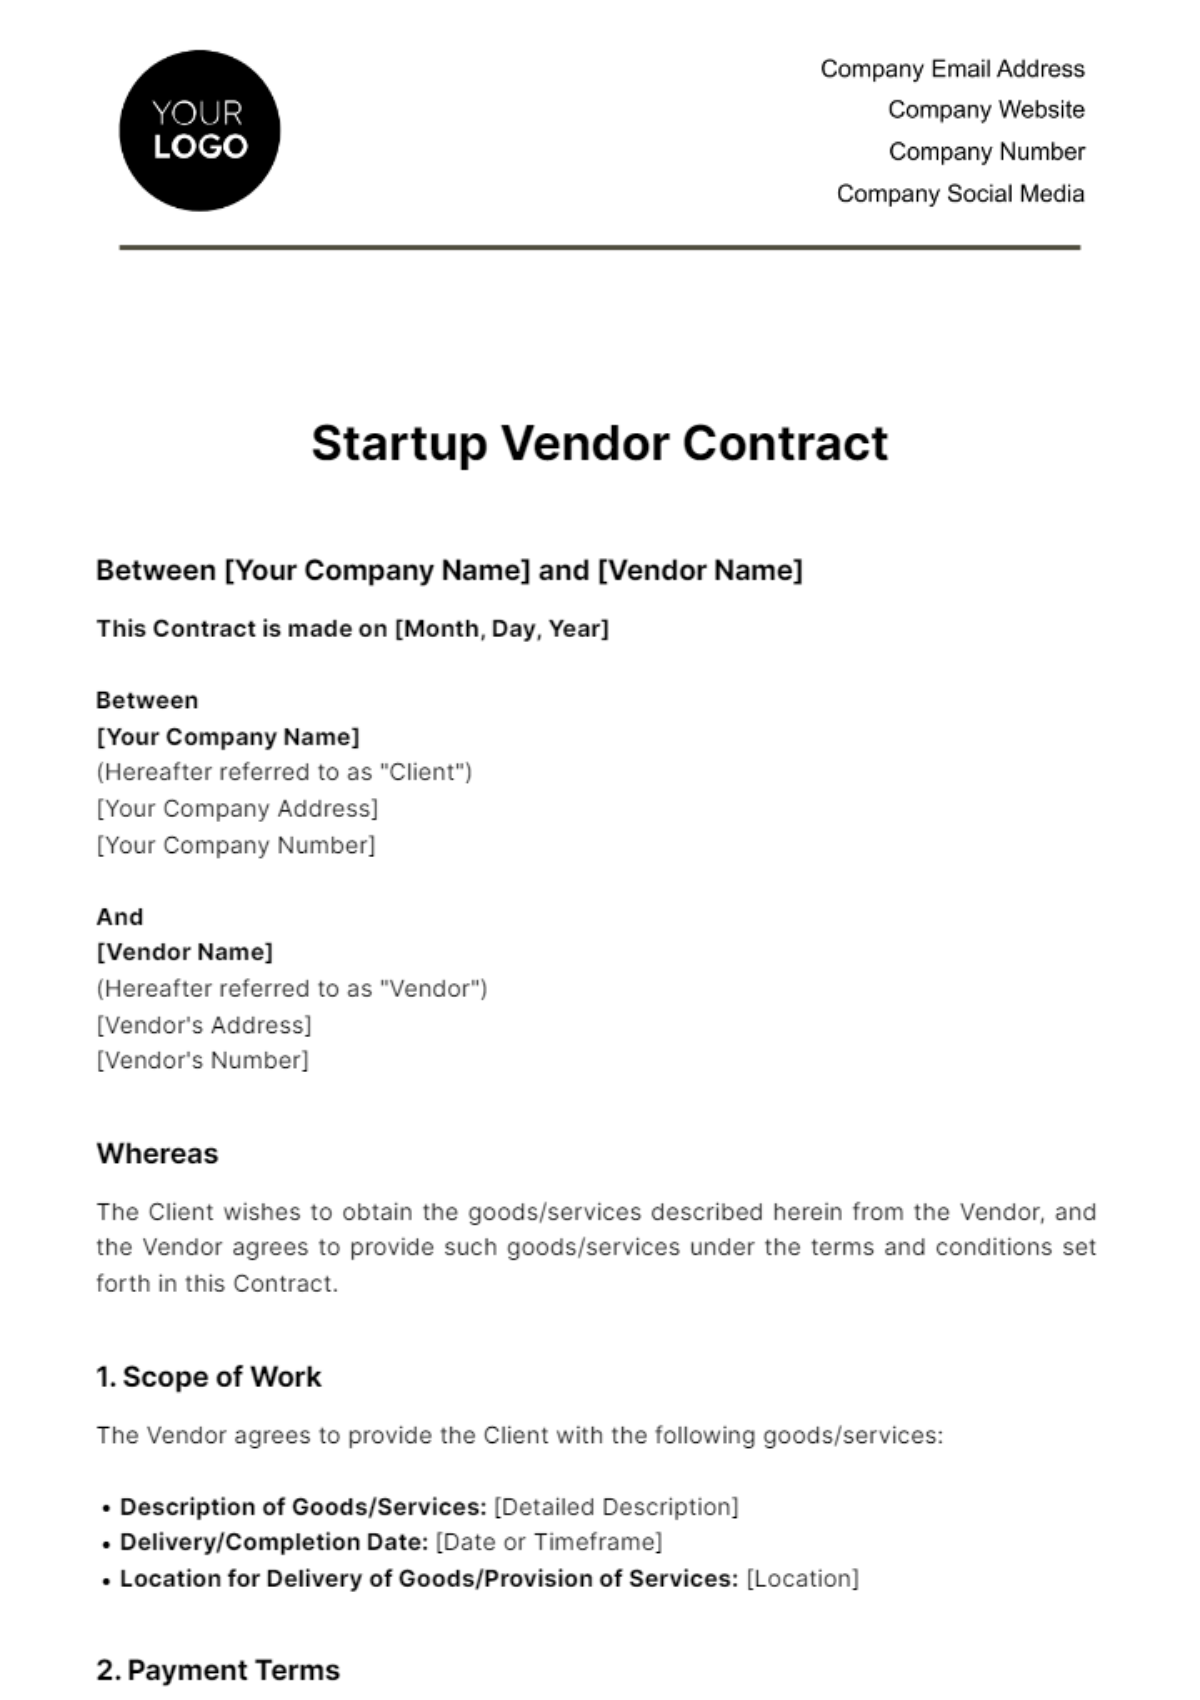 Startup Vendor Contract Template